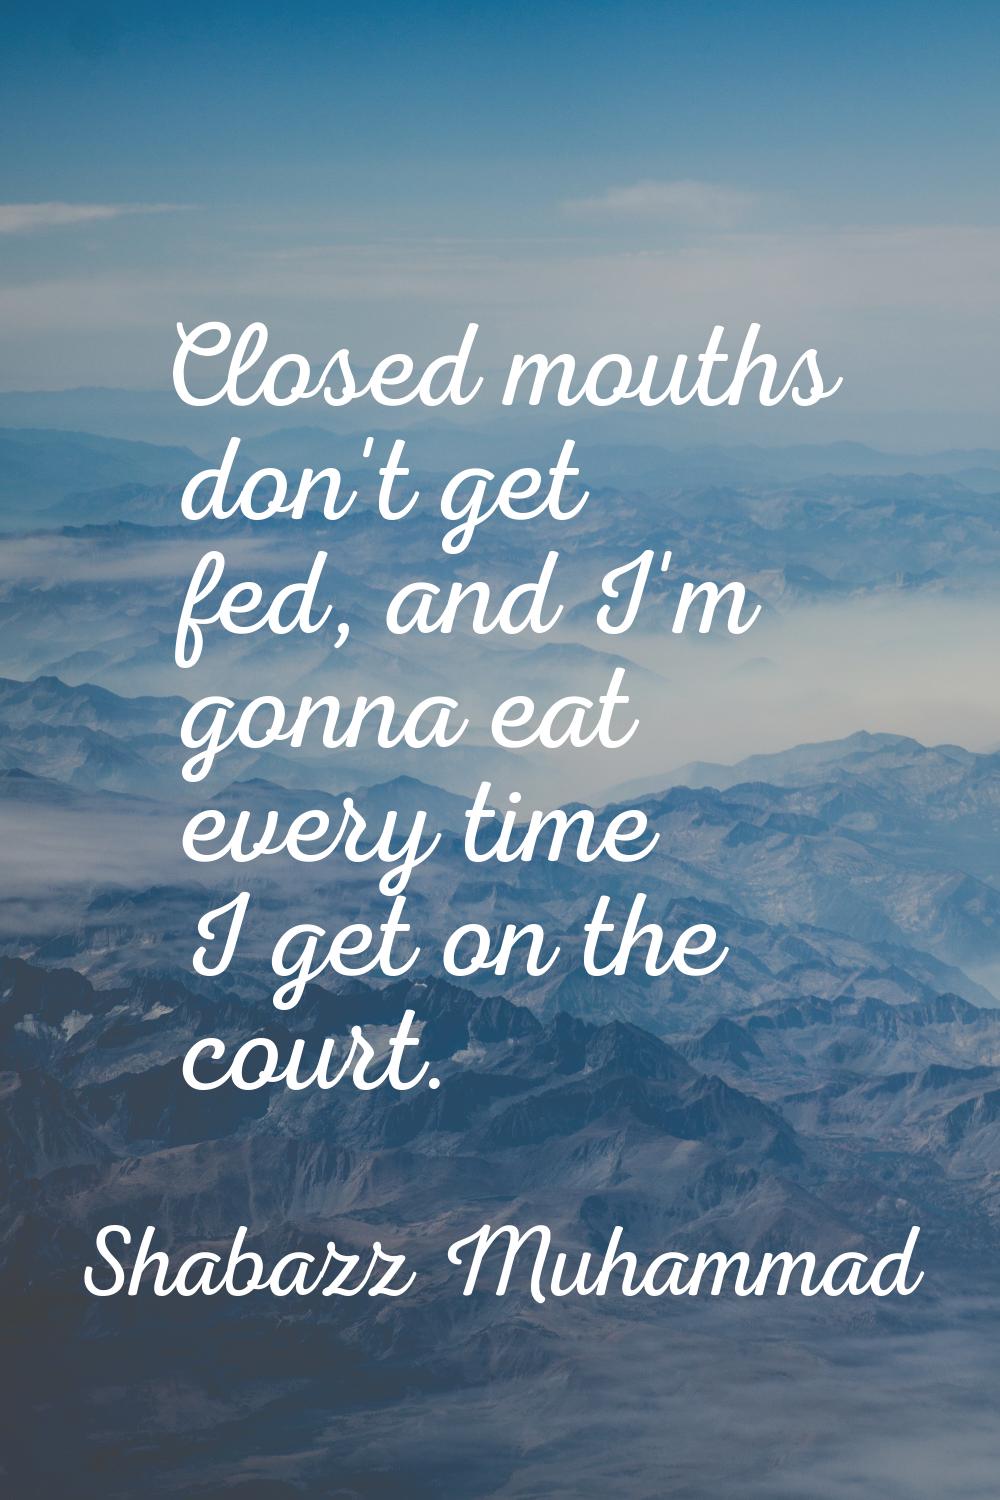 Closed mouths don't get fed, and I'm gonna eat every time I get on the court.